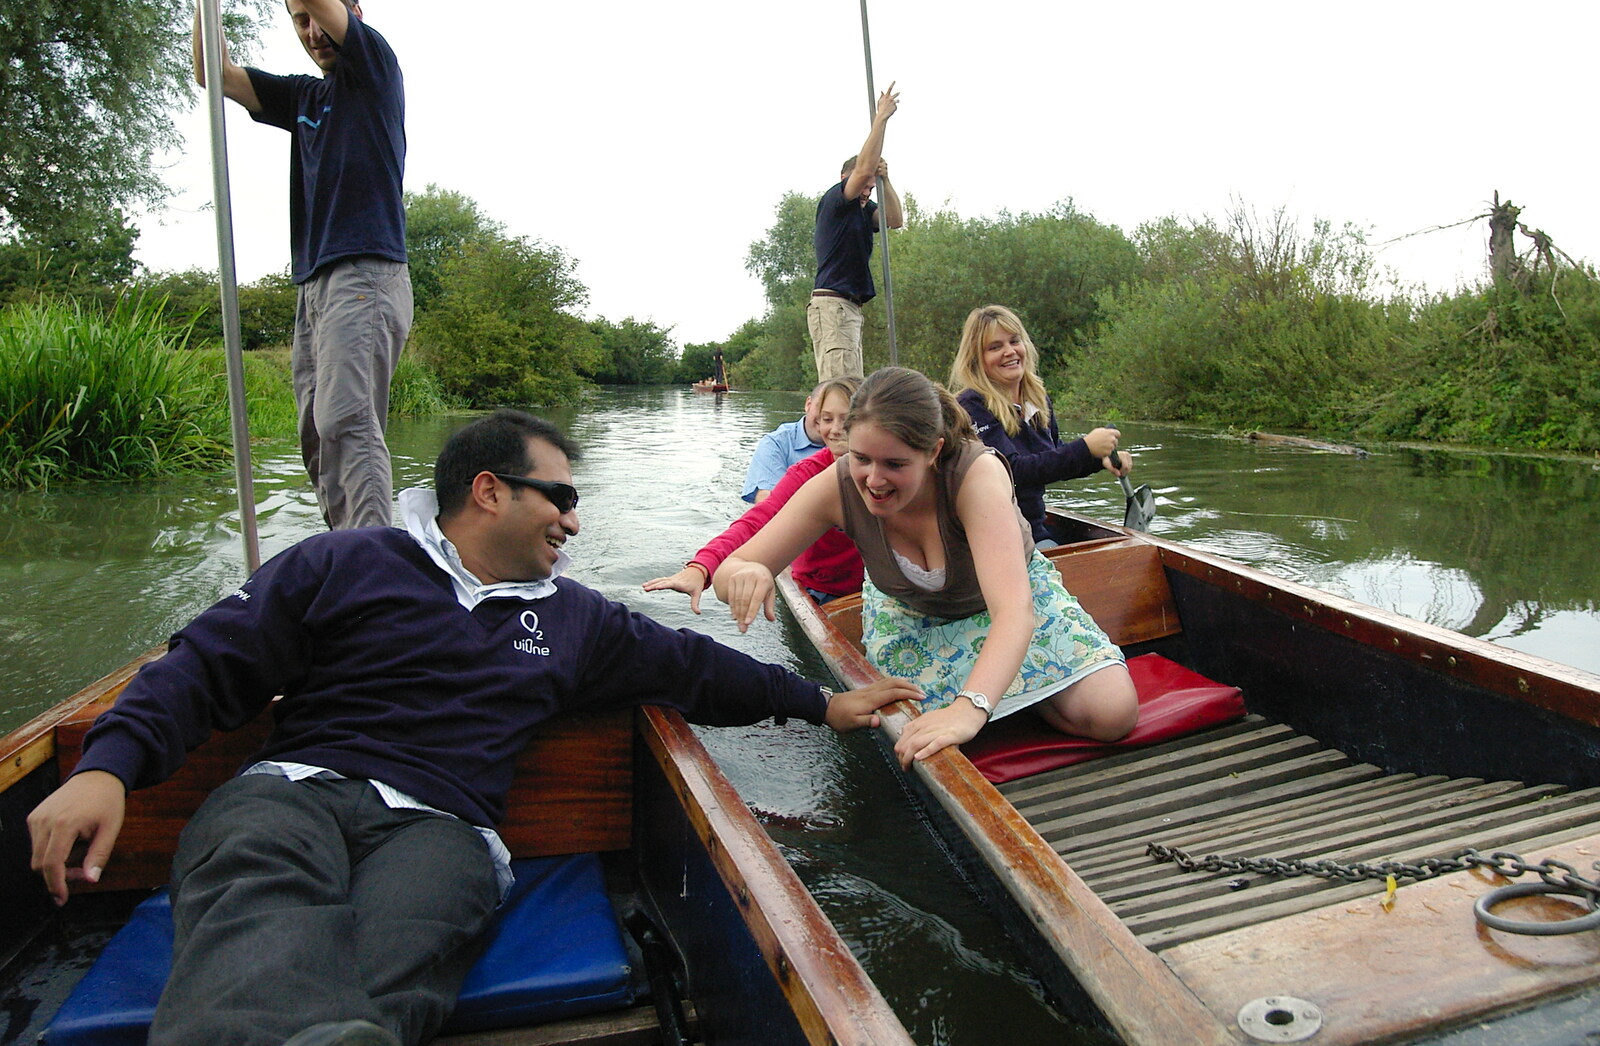 Anwar fends off Isobel's punt from Qualcomm goes Punting on the Cam, Grantchester Meadows, Cambridge - 18th August 2005